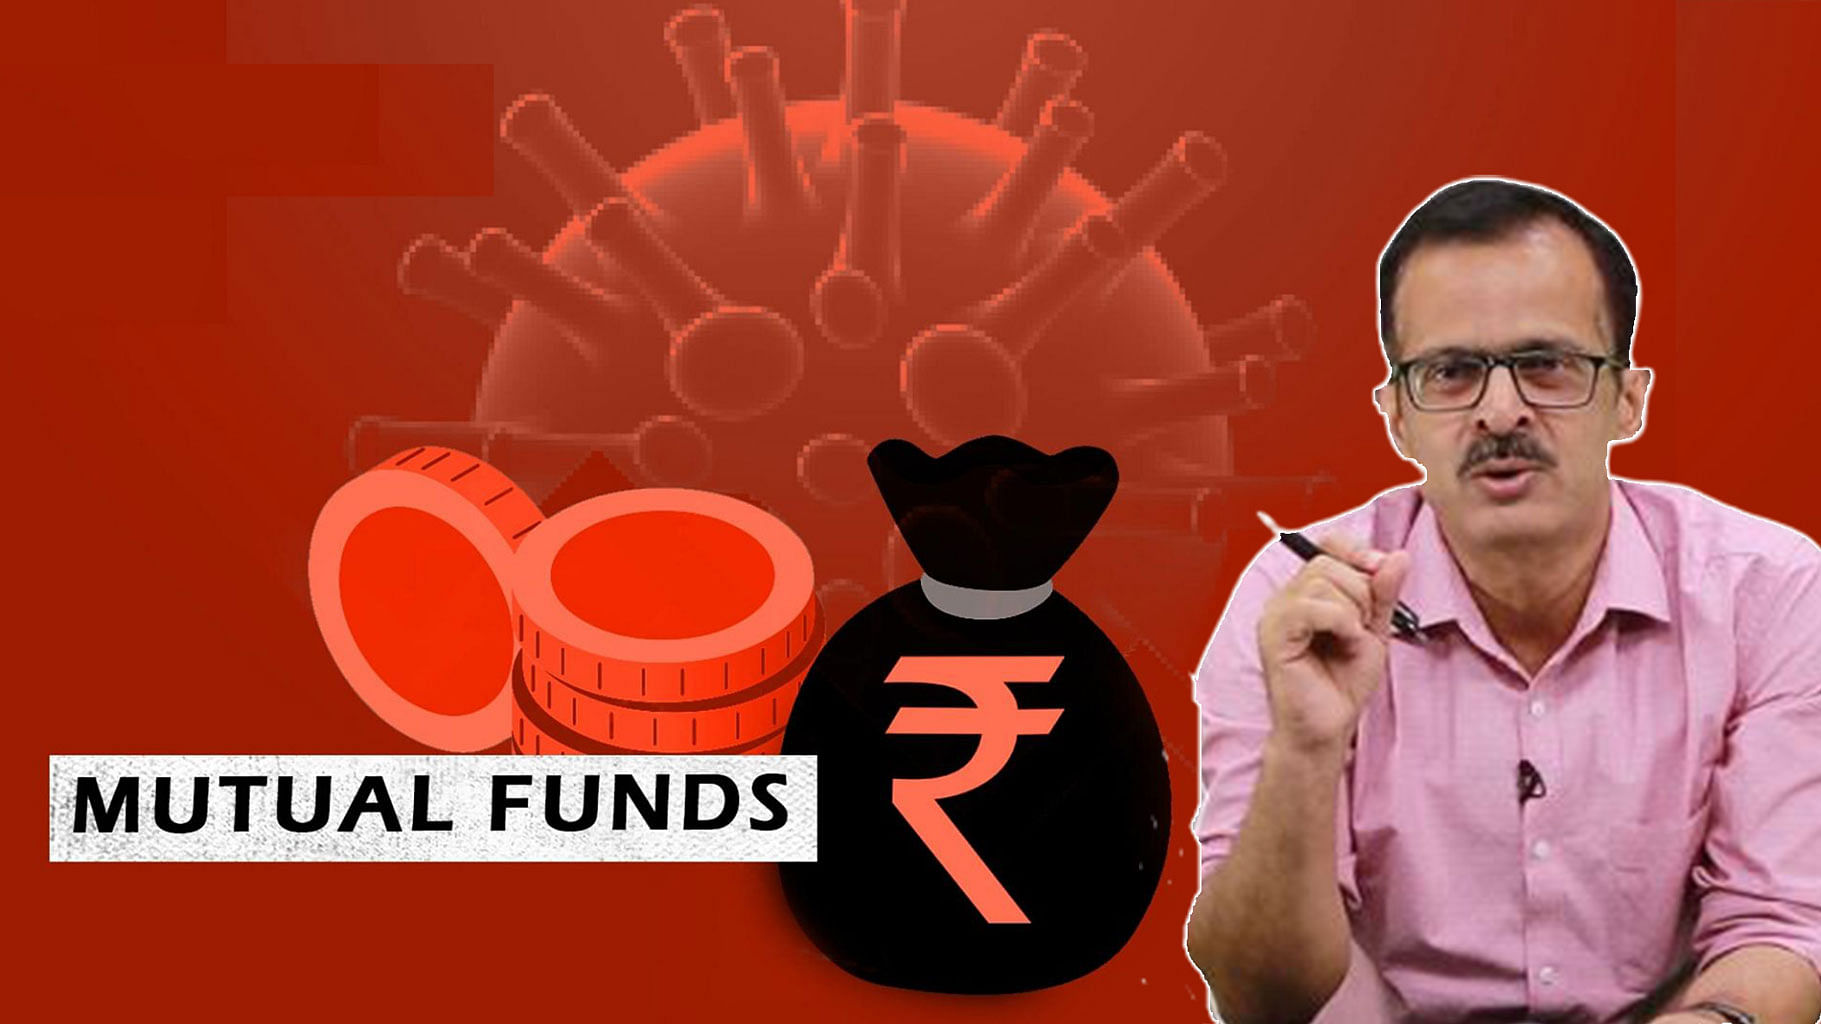 Should we take the mutual fund route to start investing? Here’s all you need to know.